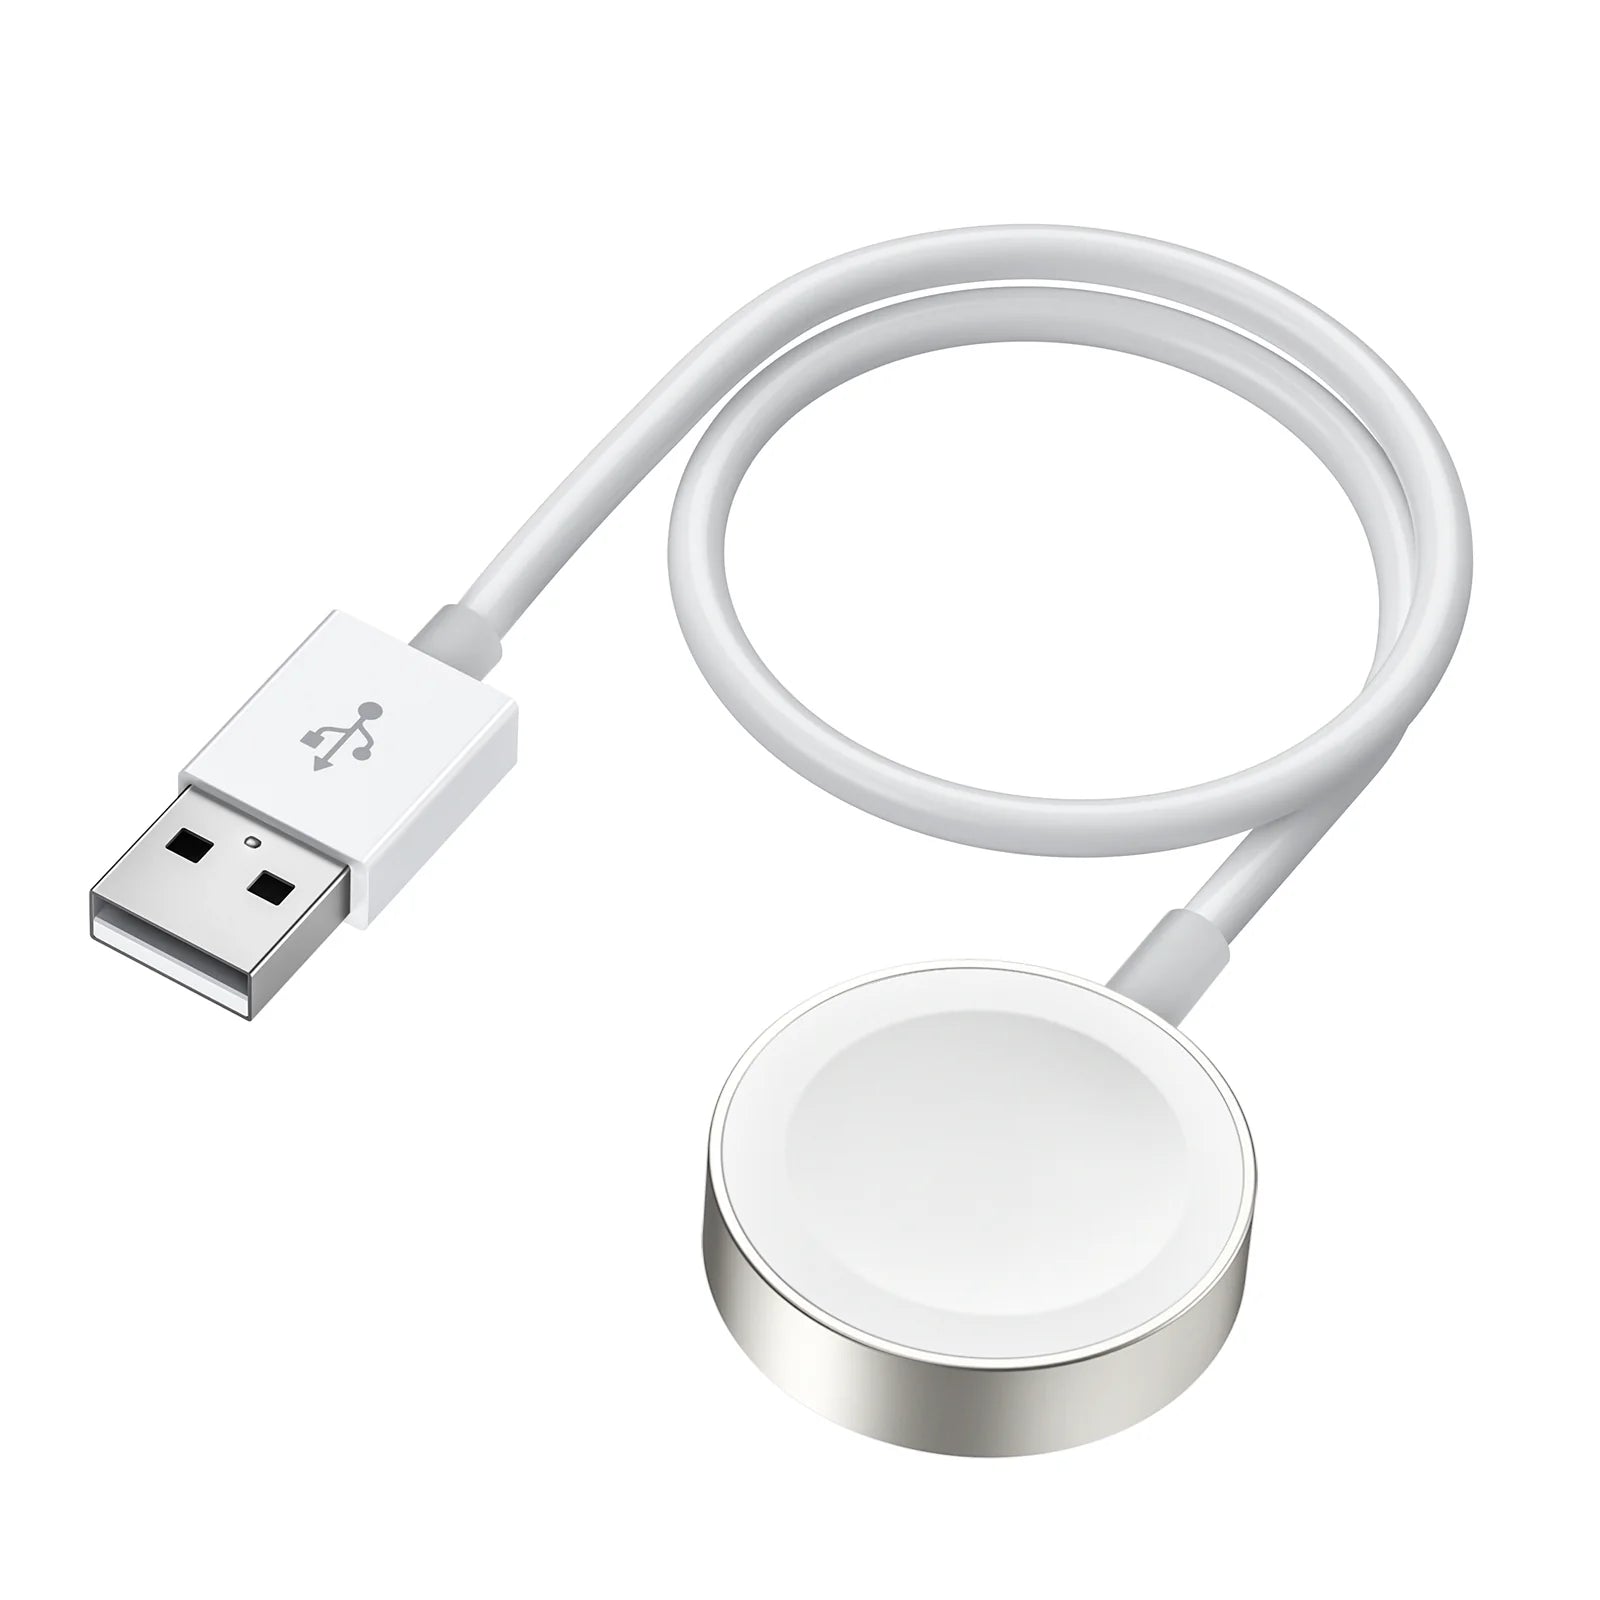 Joyroom IP Smart Watch Magnetic Charging Cable 0.3m - White